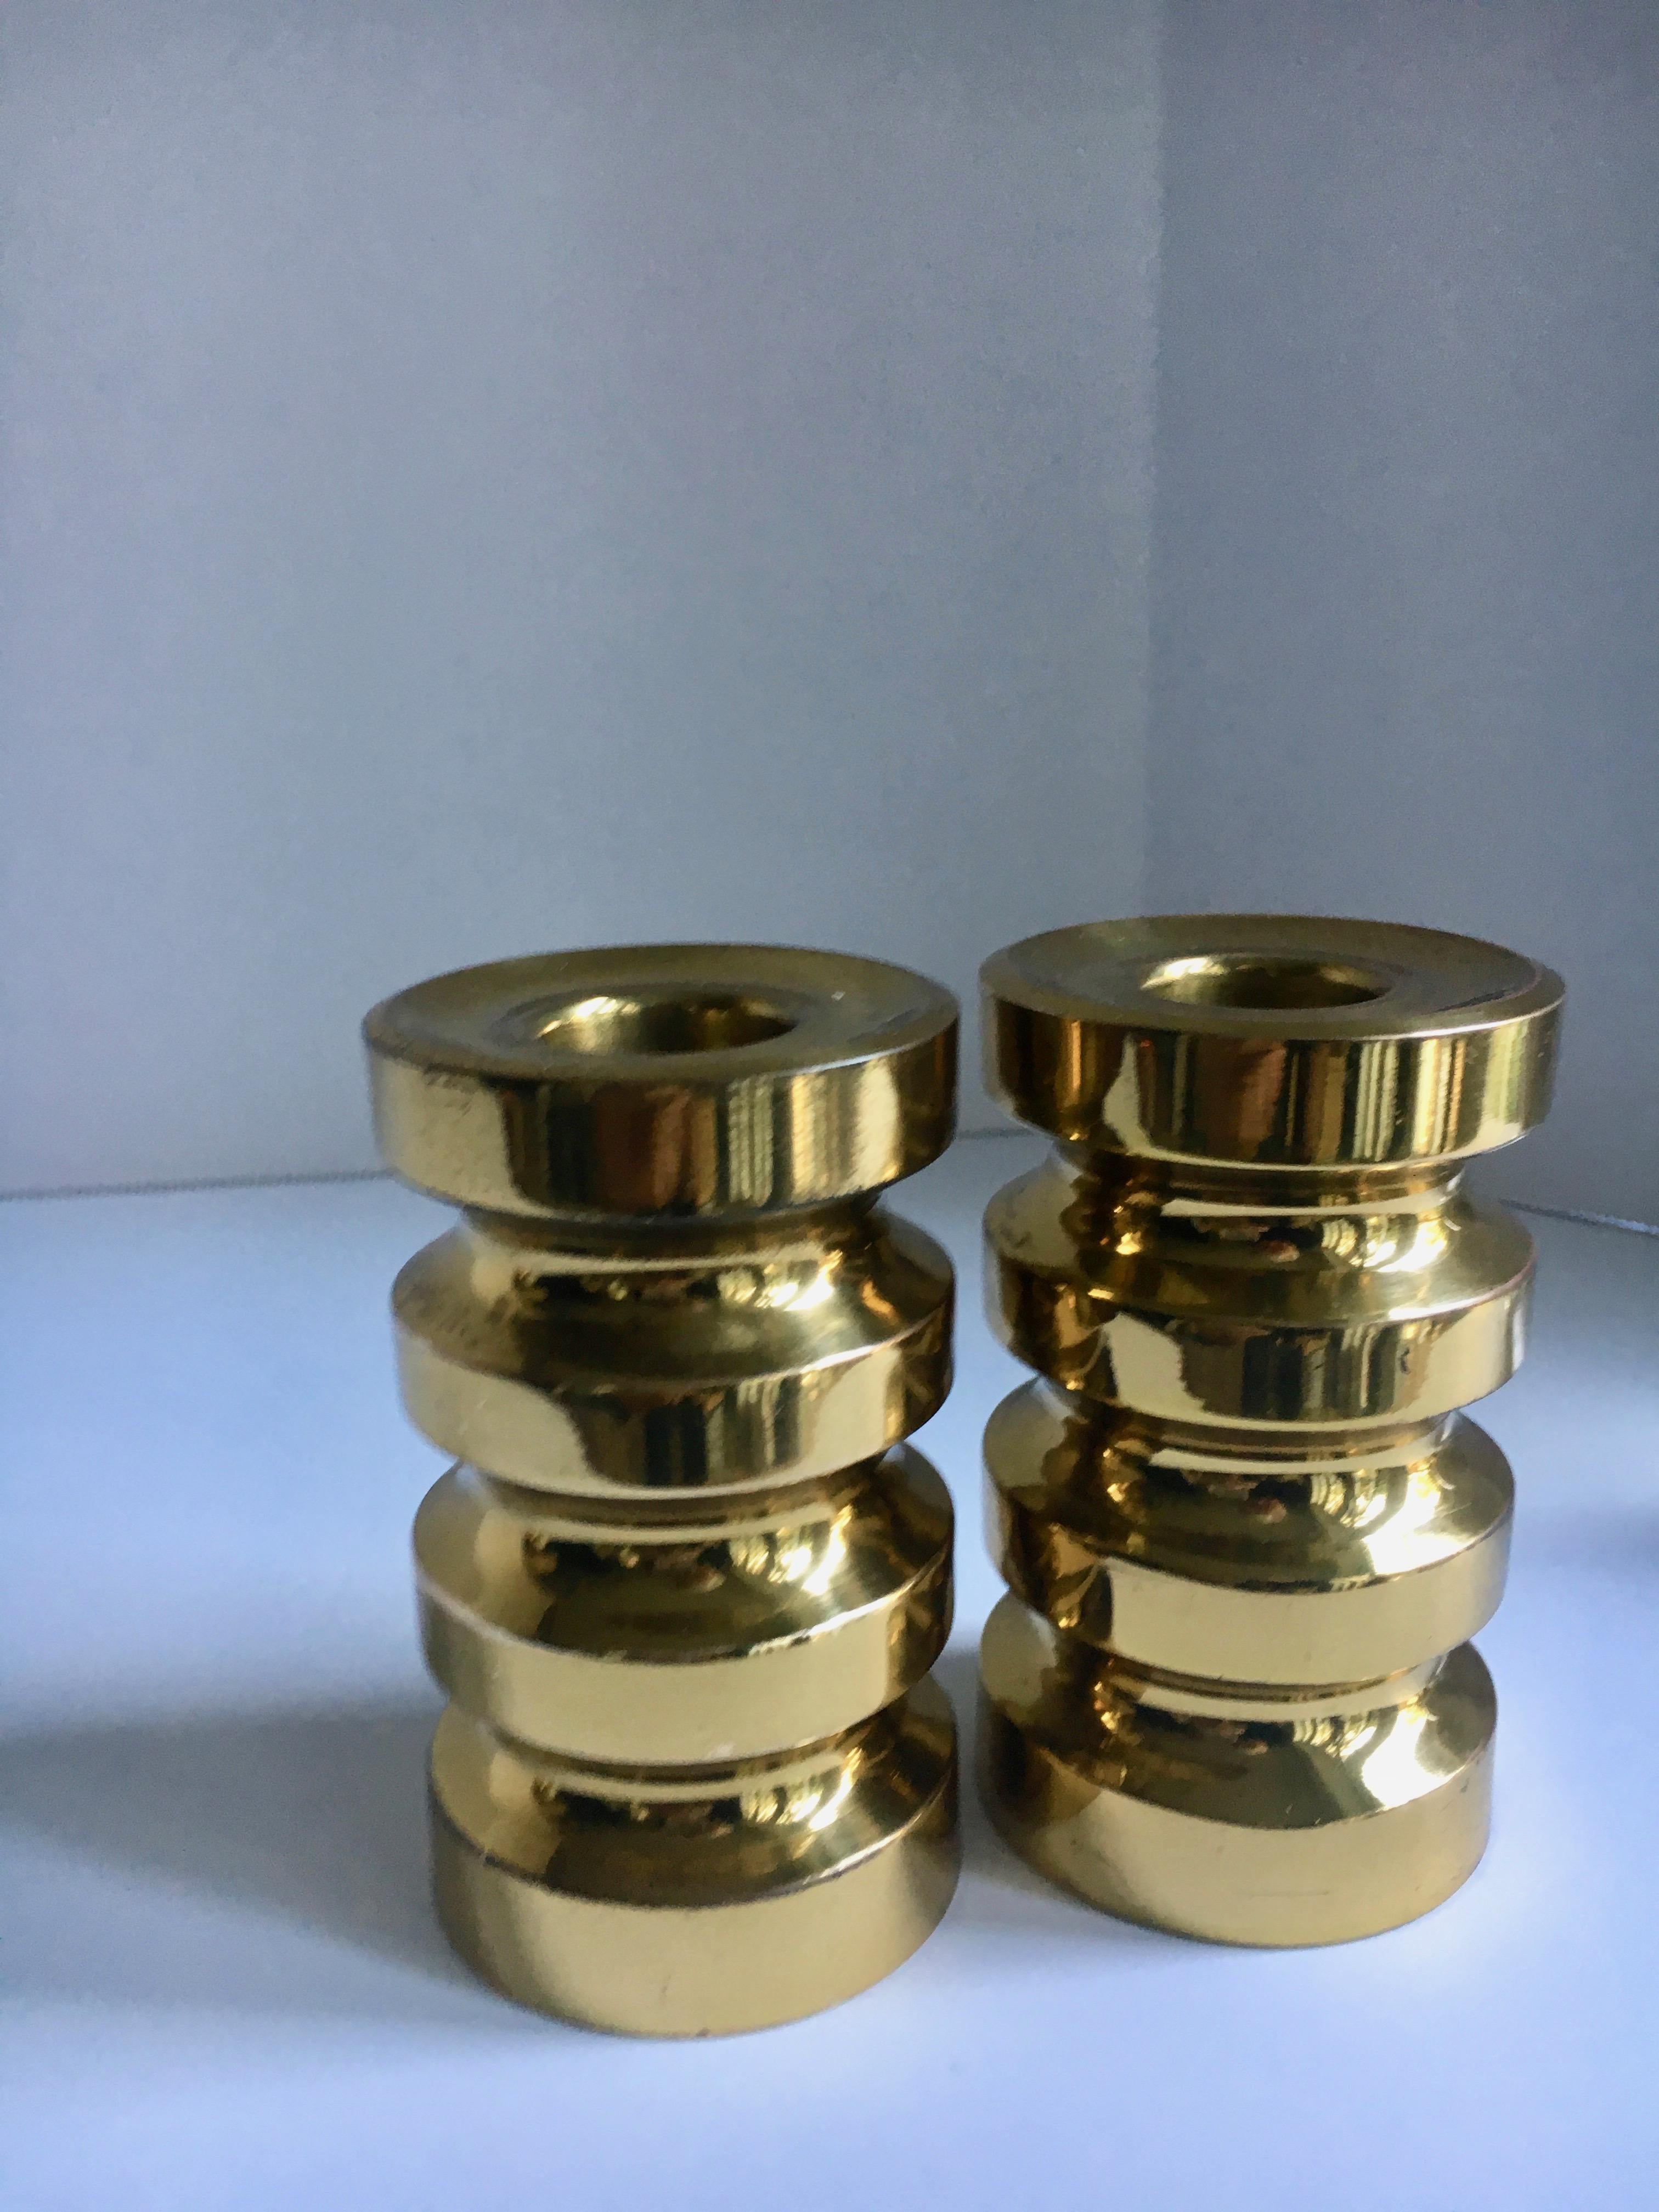 Pair of brass candlesticks - modern high polished brass candlesticks in very good condition - a handsome pair, 